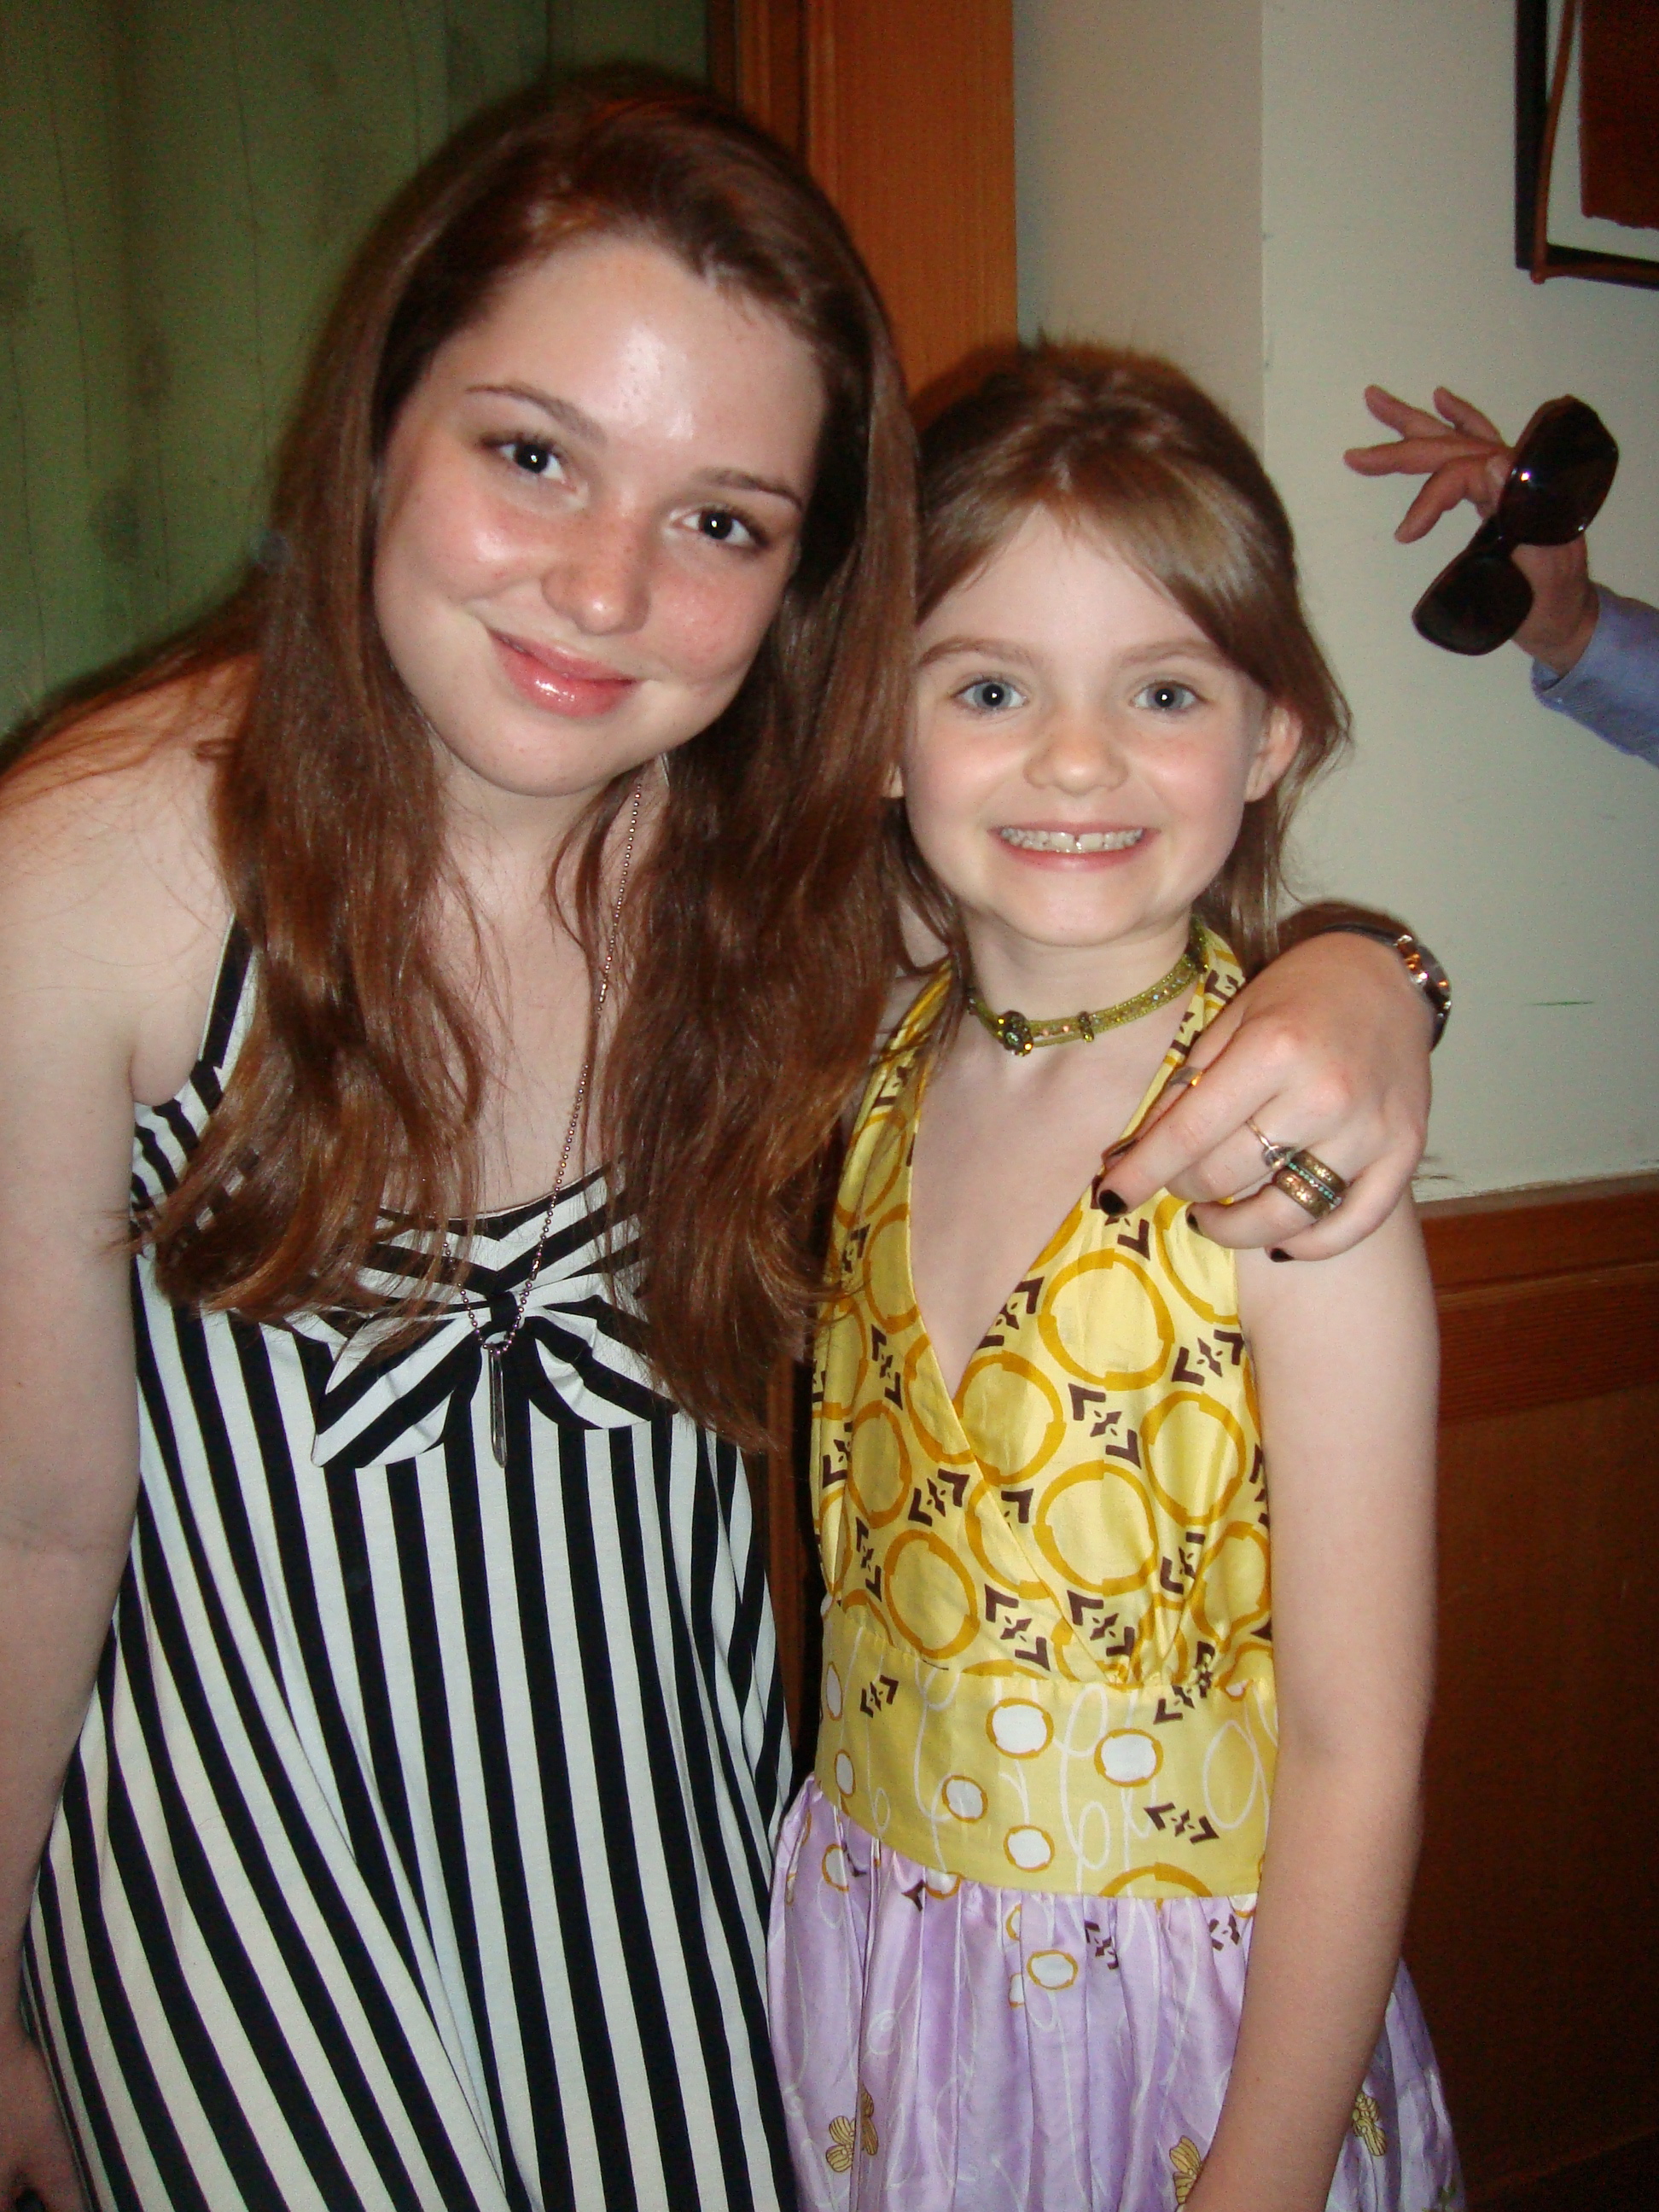 Morgan Lily & Jennifer Stone attend the After Party of Journey To The Center Of The Earth Los Angeles Premiere.